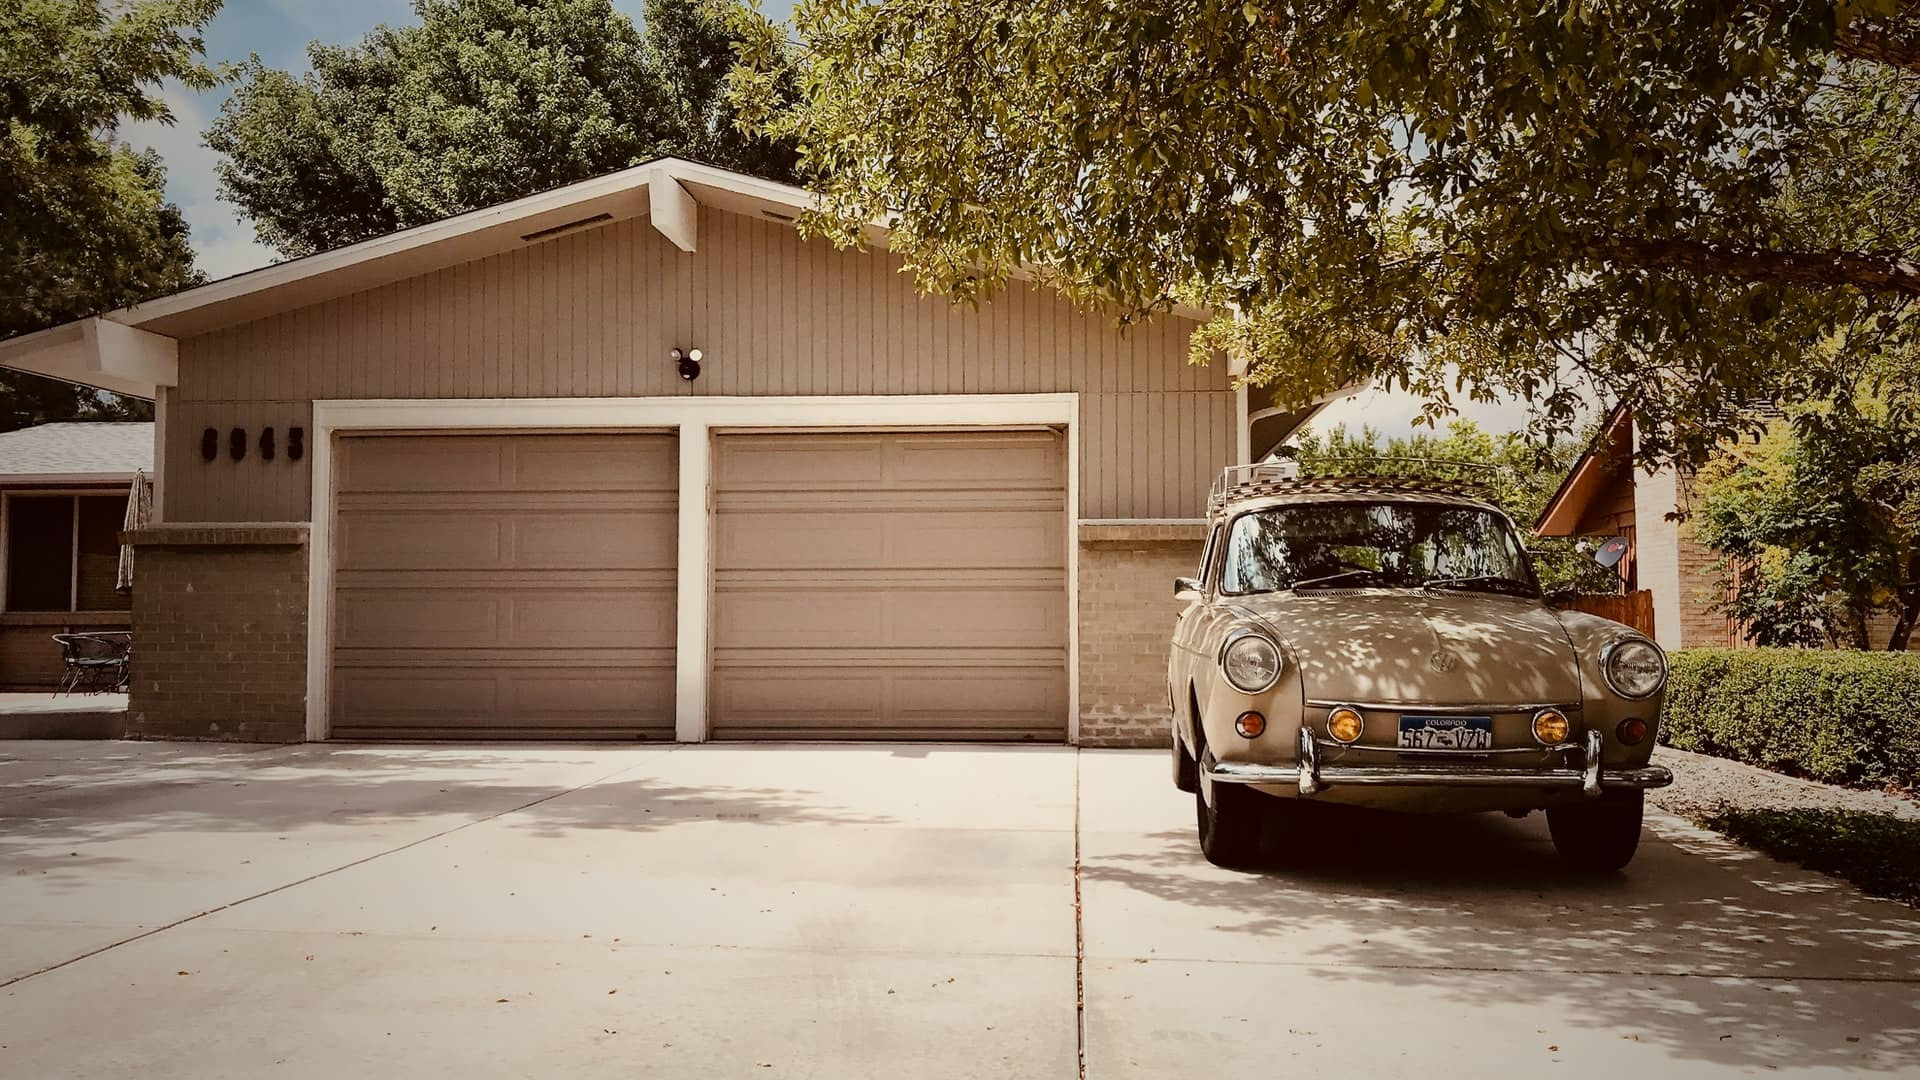 How to cool a garage with no windows? (7 tips)